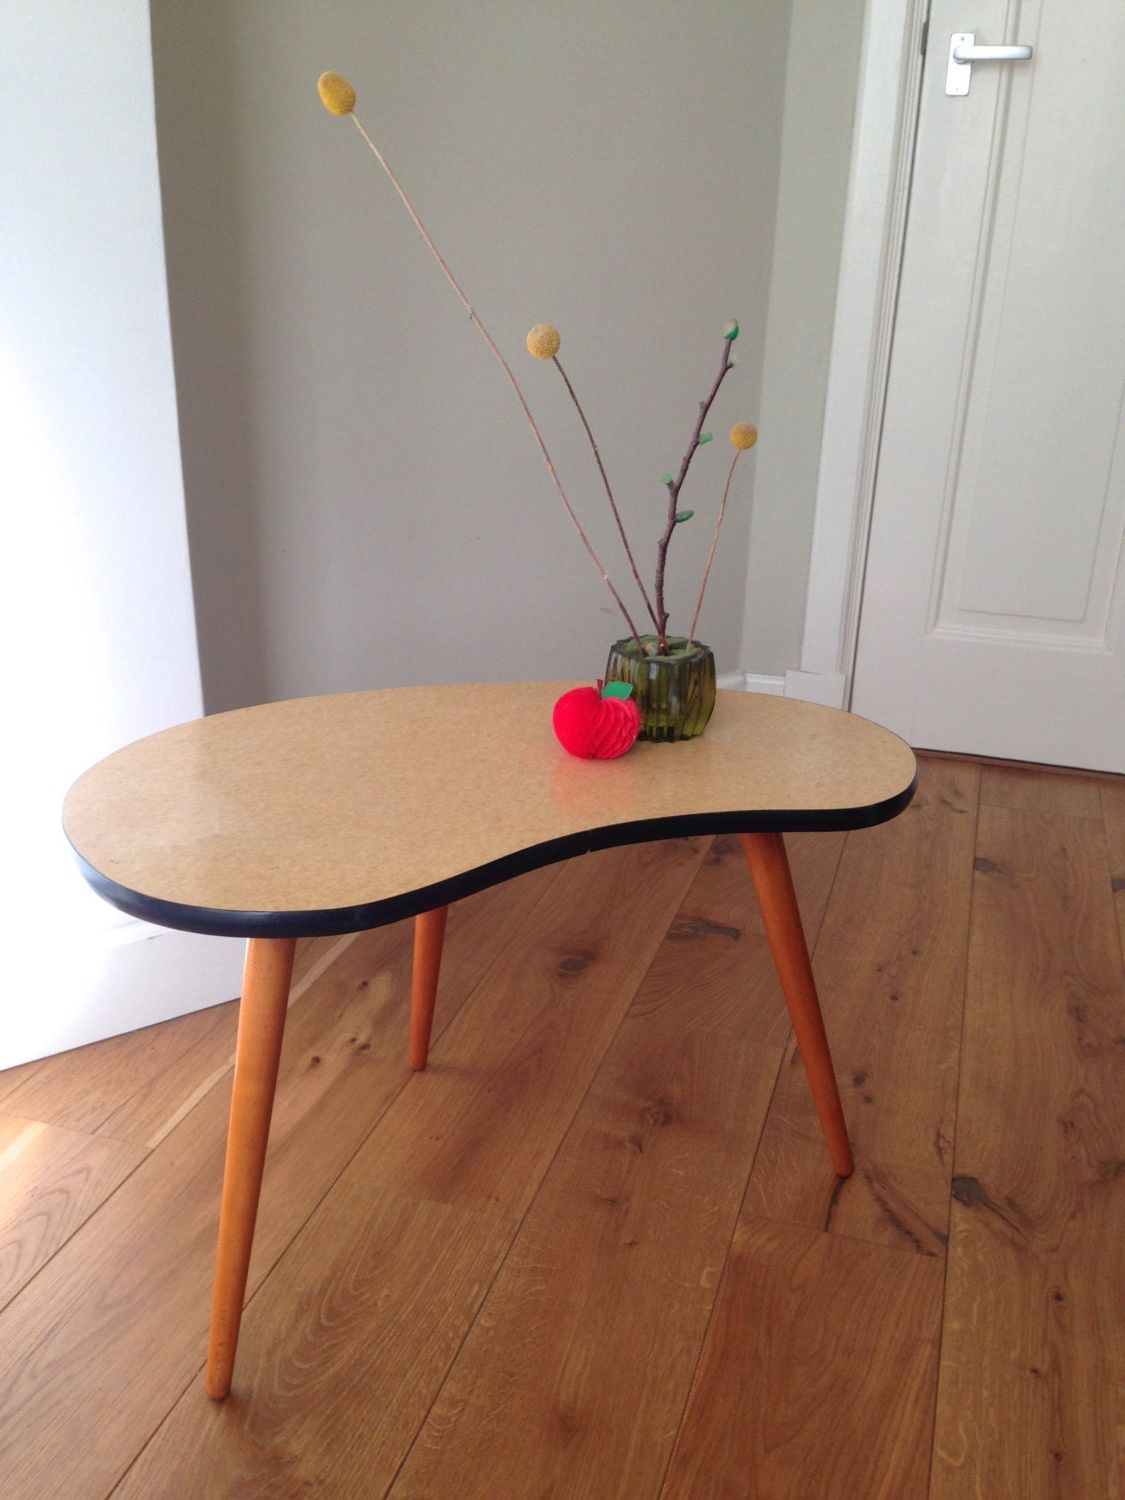 Vtg Tripod Coffee Table // Kidney Shape // Large Size Intended For 2019 Coffee Tables With Tripod Legs (View 1 of 10)